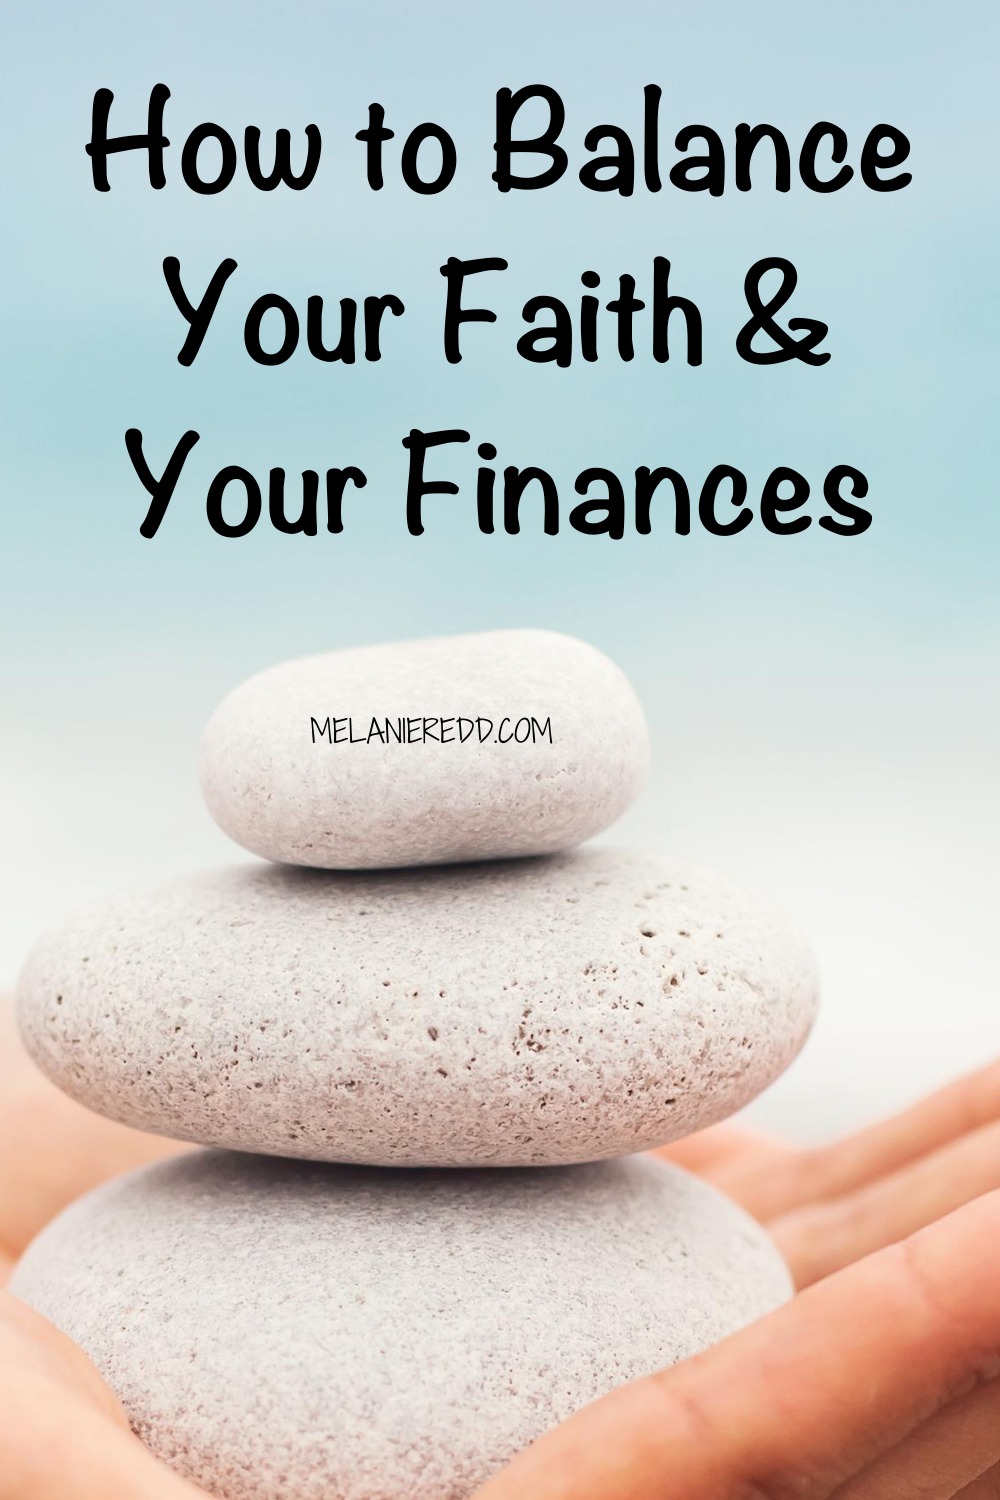 The Bible has a lot to say money, spending, saving, and finances. Here are a few suggestions for how to balance your faith & your money.